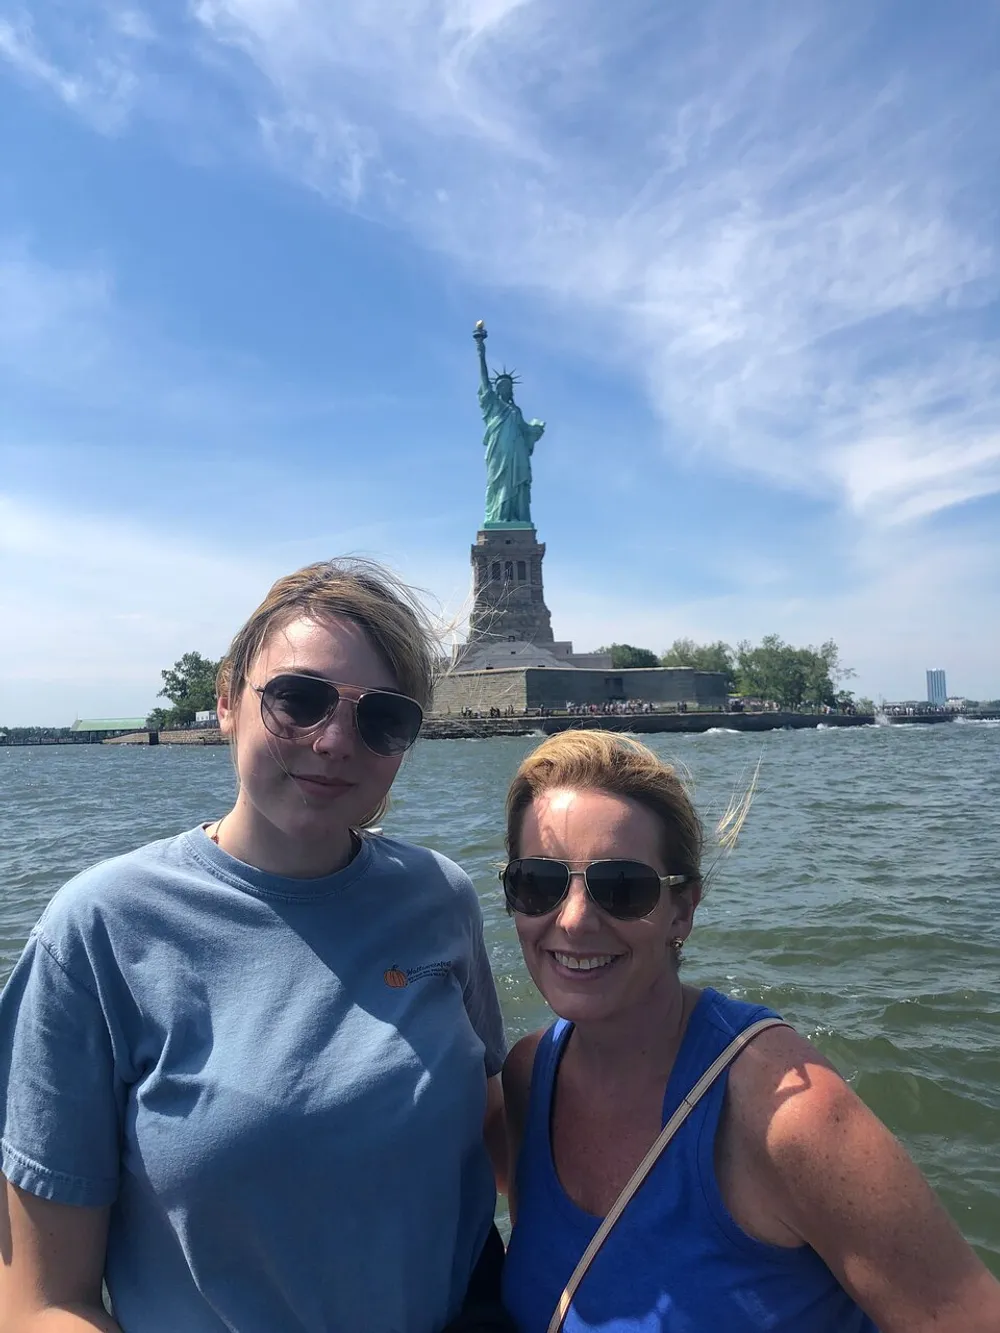 Two people are posing for a photo with the Statue of Liberty in the background